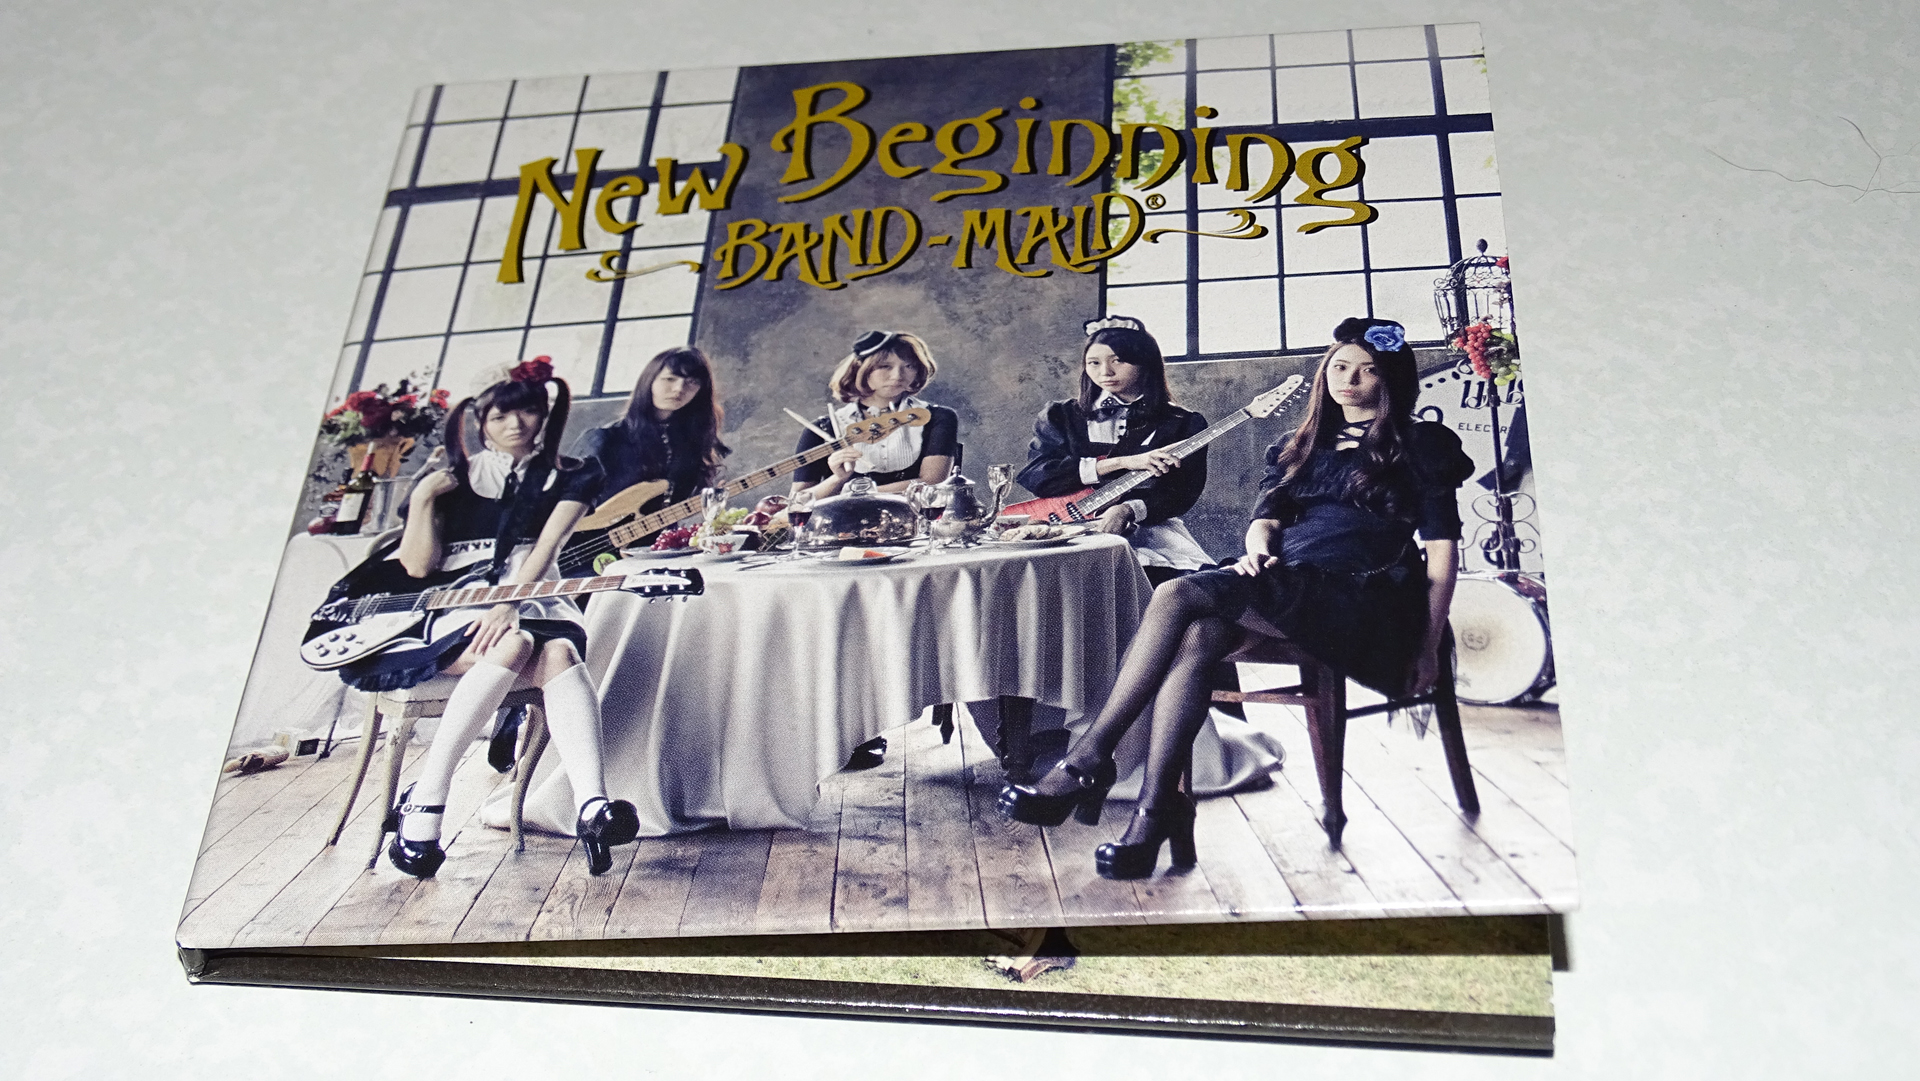 Band-Maid New Beginning CD DVD Review | hXcHector.com